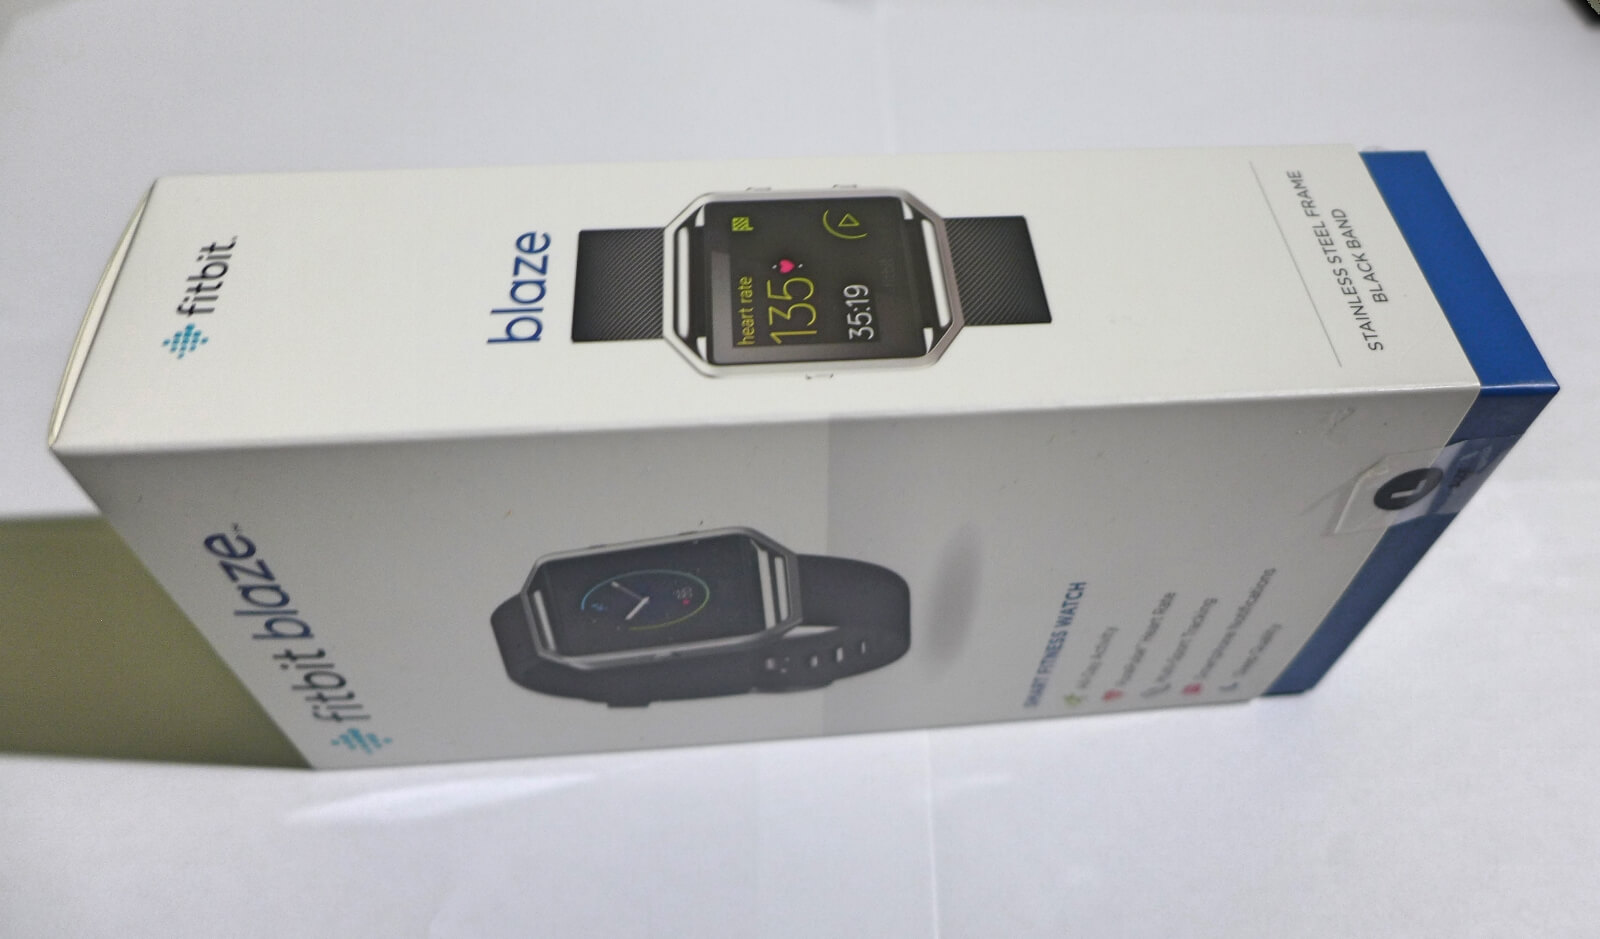 FITBIT BLAZE. The tracker can be bought from Digital Walker and Beyond The Box stores, as well as select Toby’s outlets.